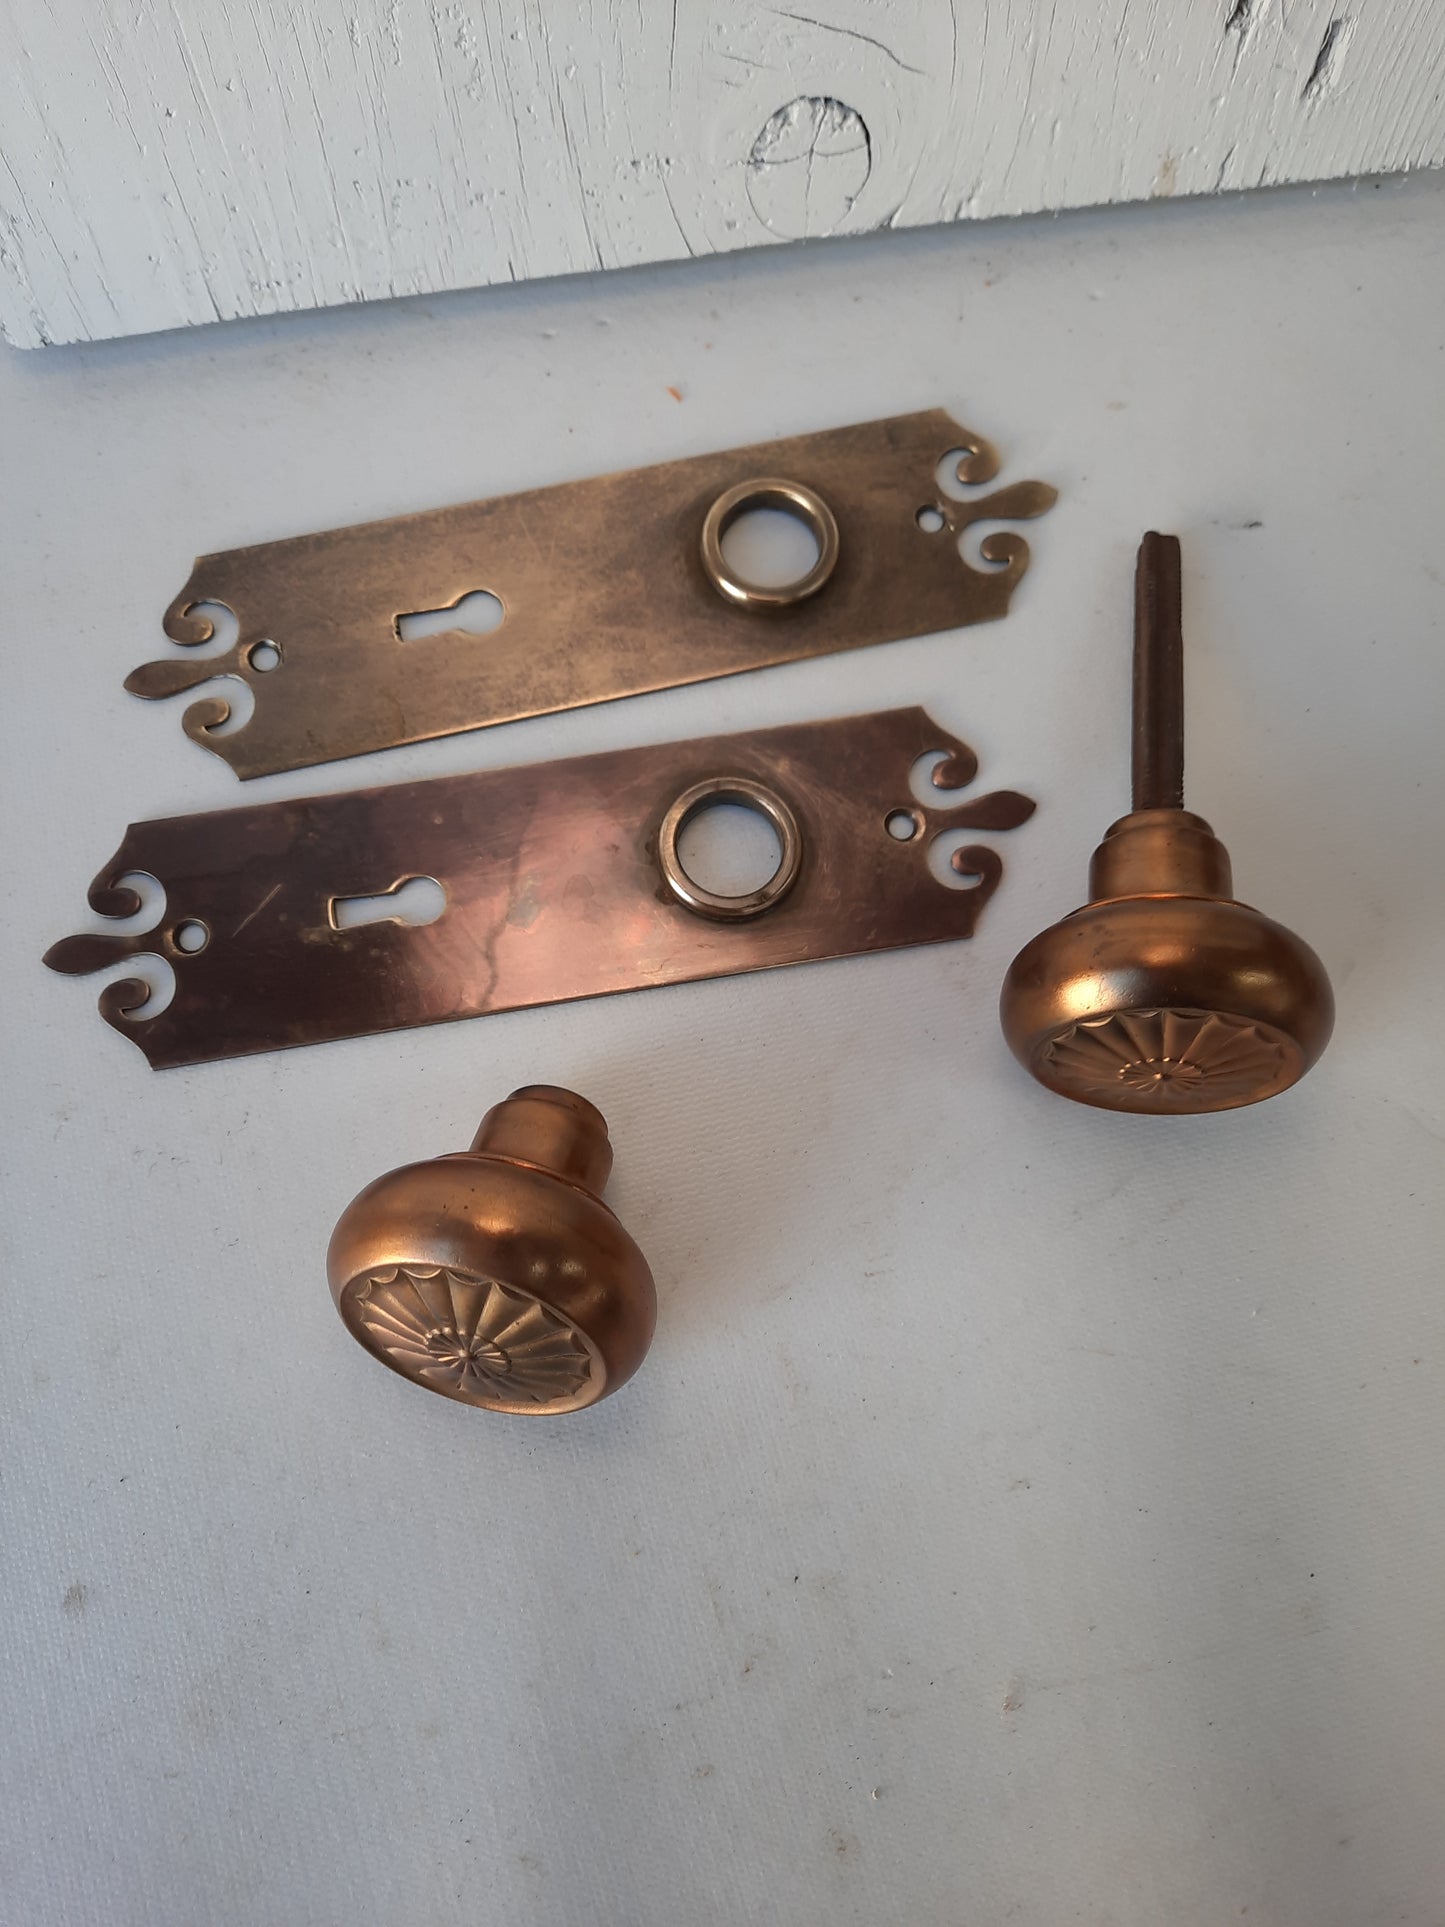 Art Deco Fan Style Doorknob with Backplates, Brass Deco Knobs and Back Plates Set 020301